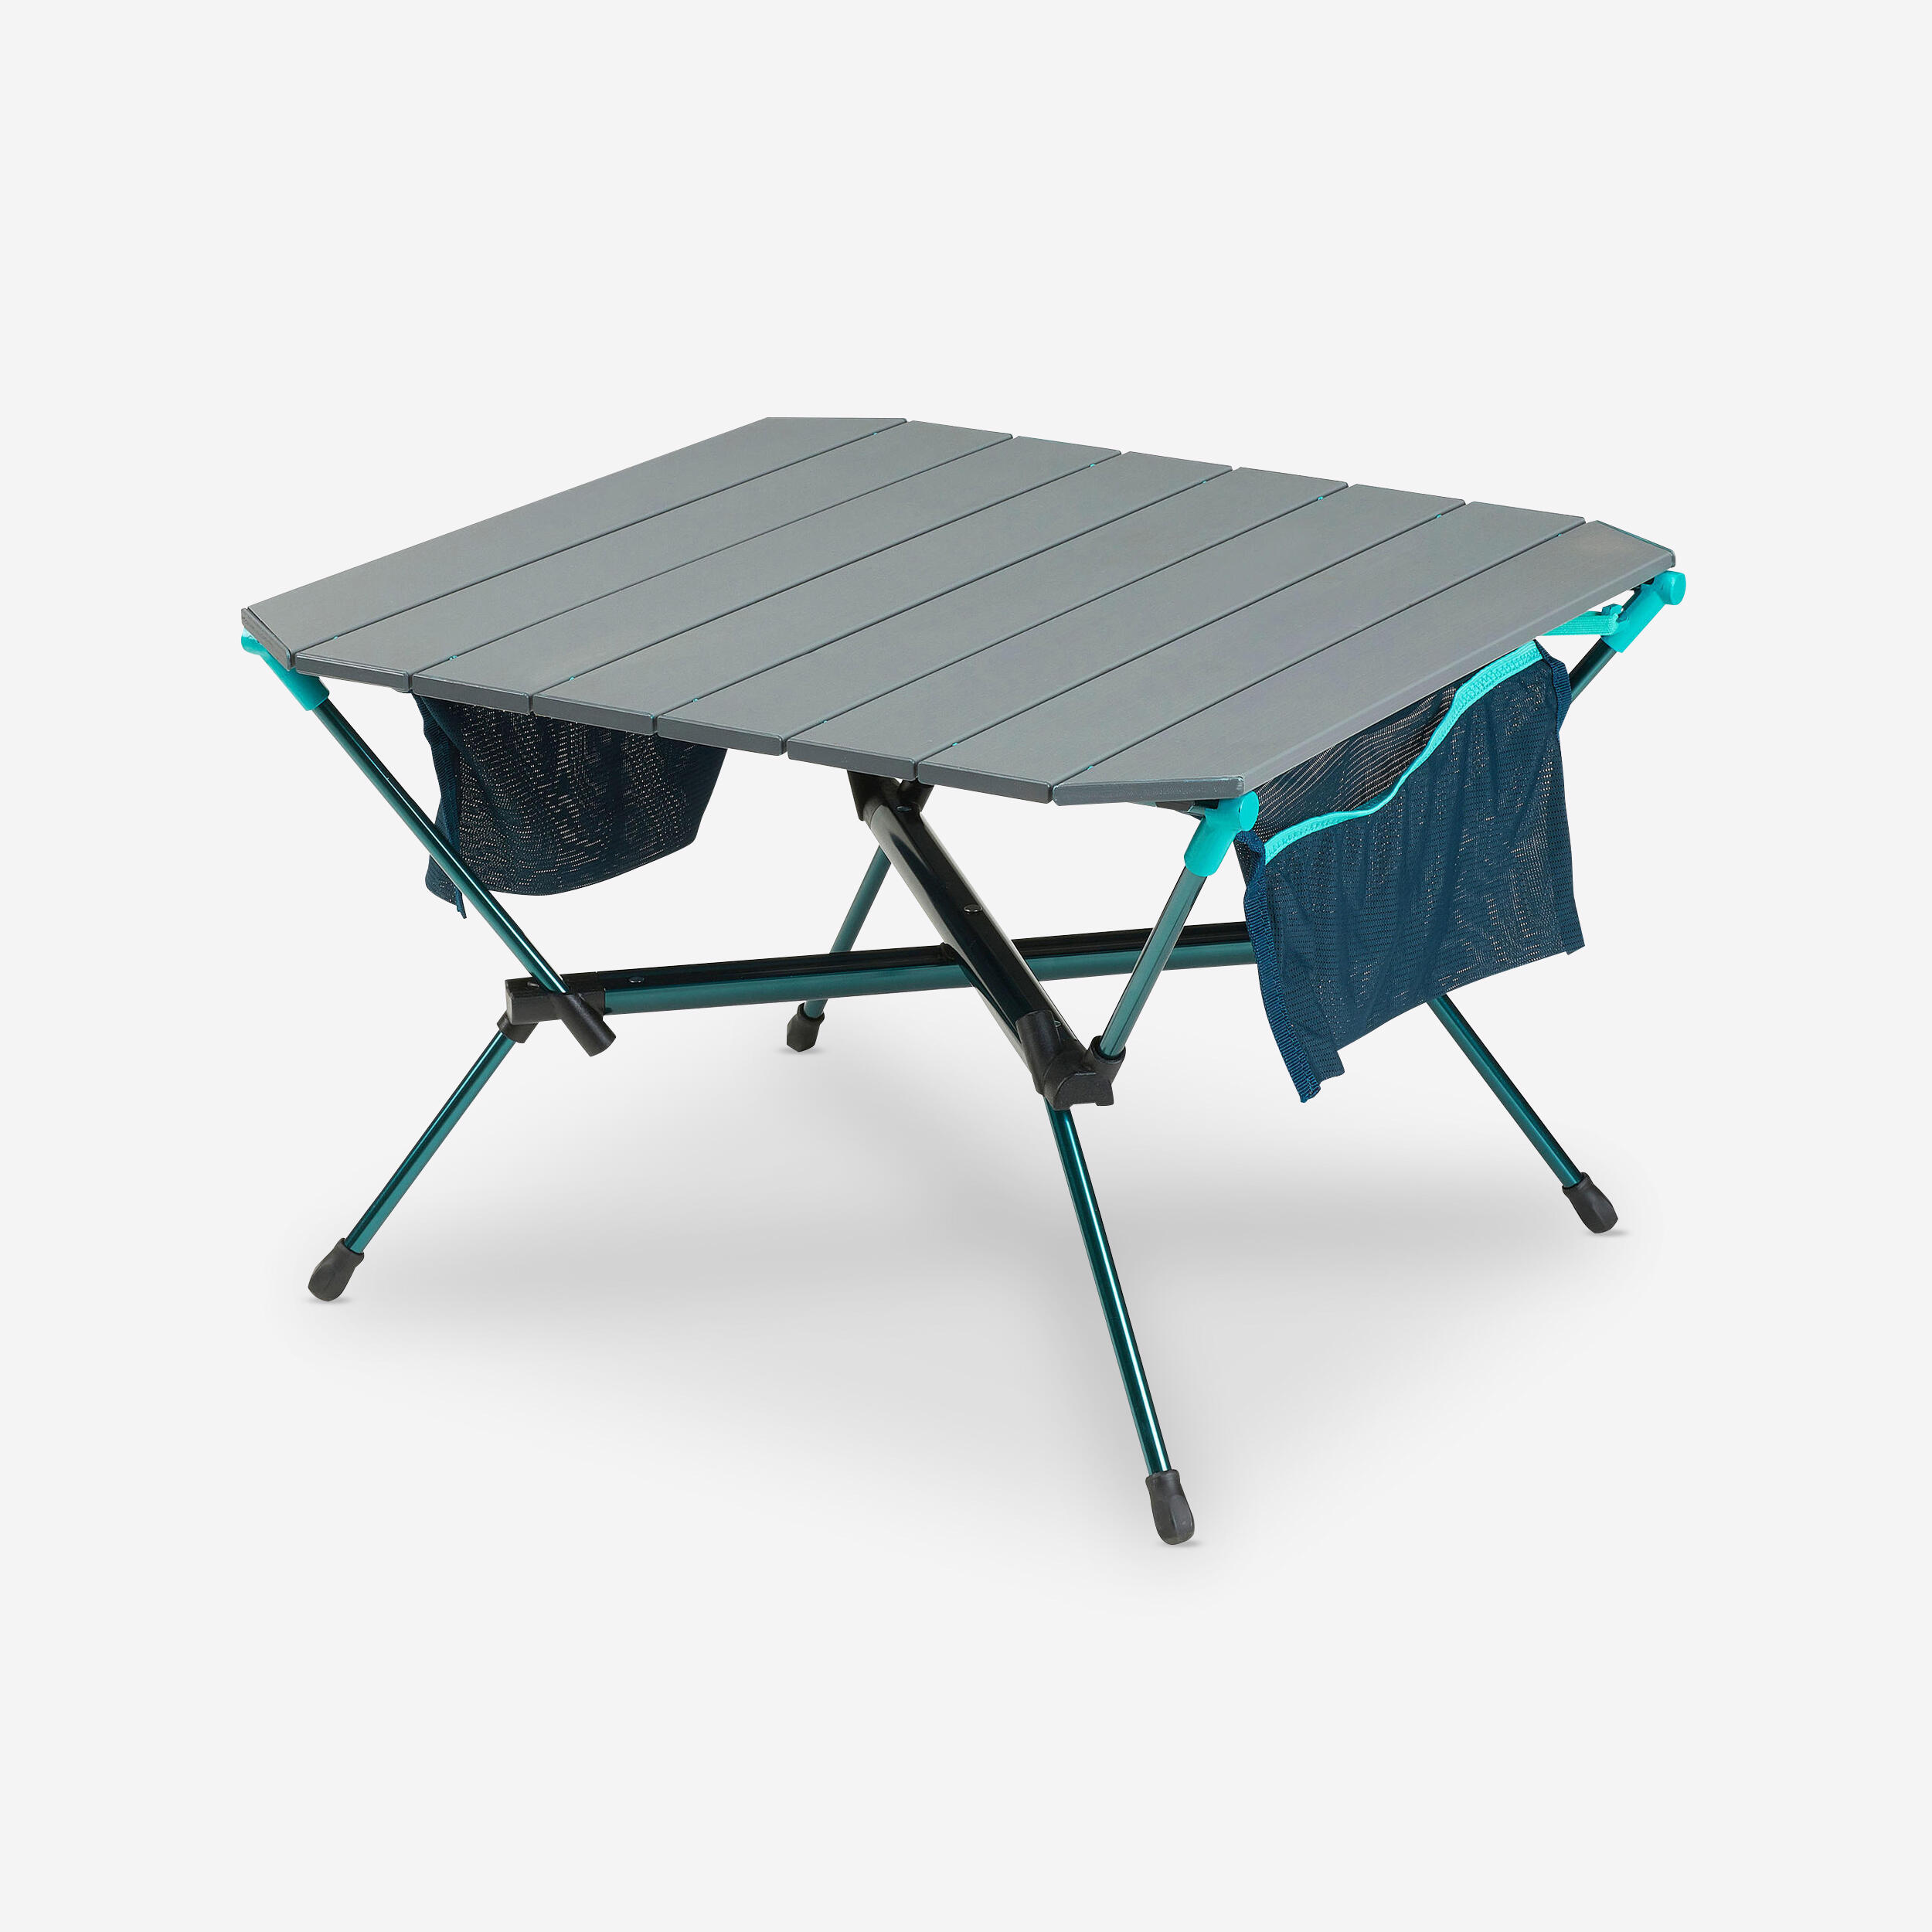 FOLDING CAMPING TABLE - MH500 1/10